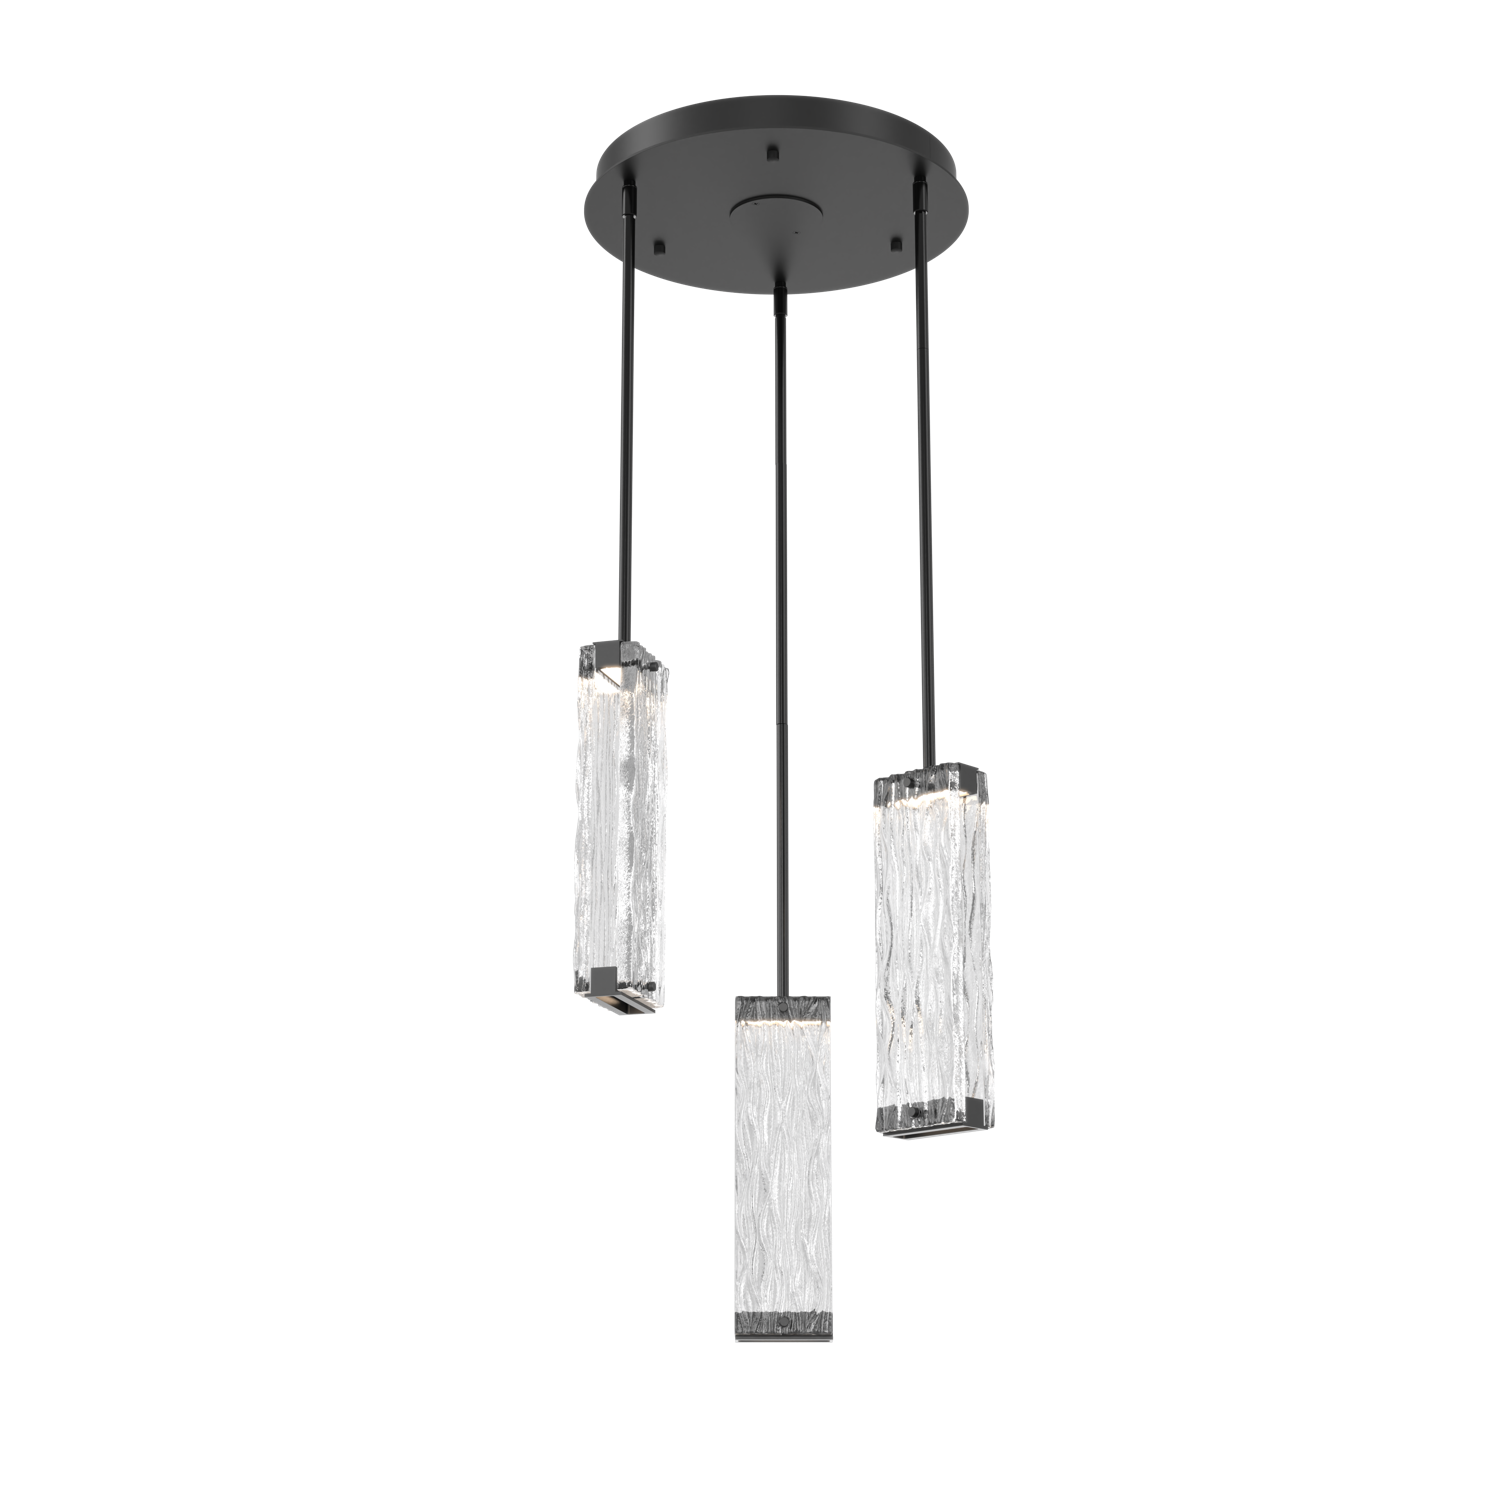 CHB0090-03-MB-TT-Hammerton-Studio-Tabulo-3-light-multi-pendant-chandelier-with-matte-black-finish-and-clear-tidal-cast-glass-shade-and-LED-lamping